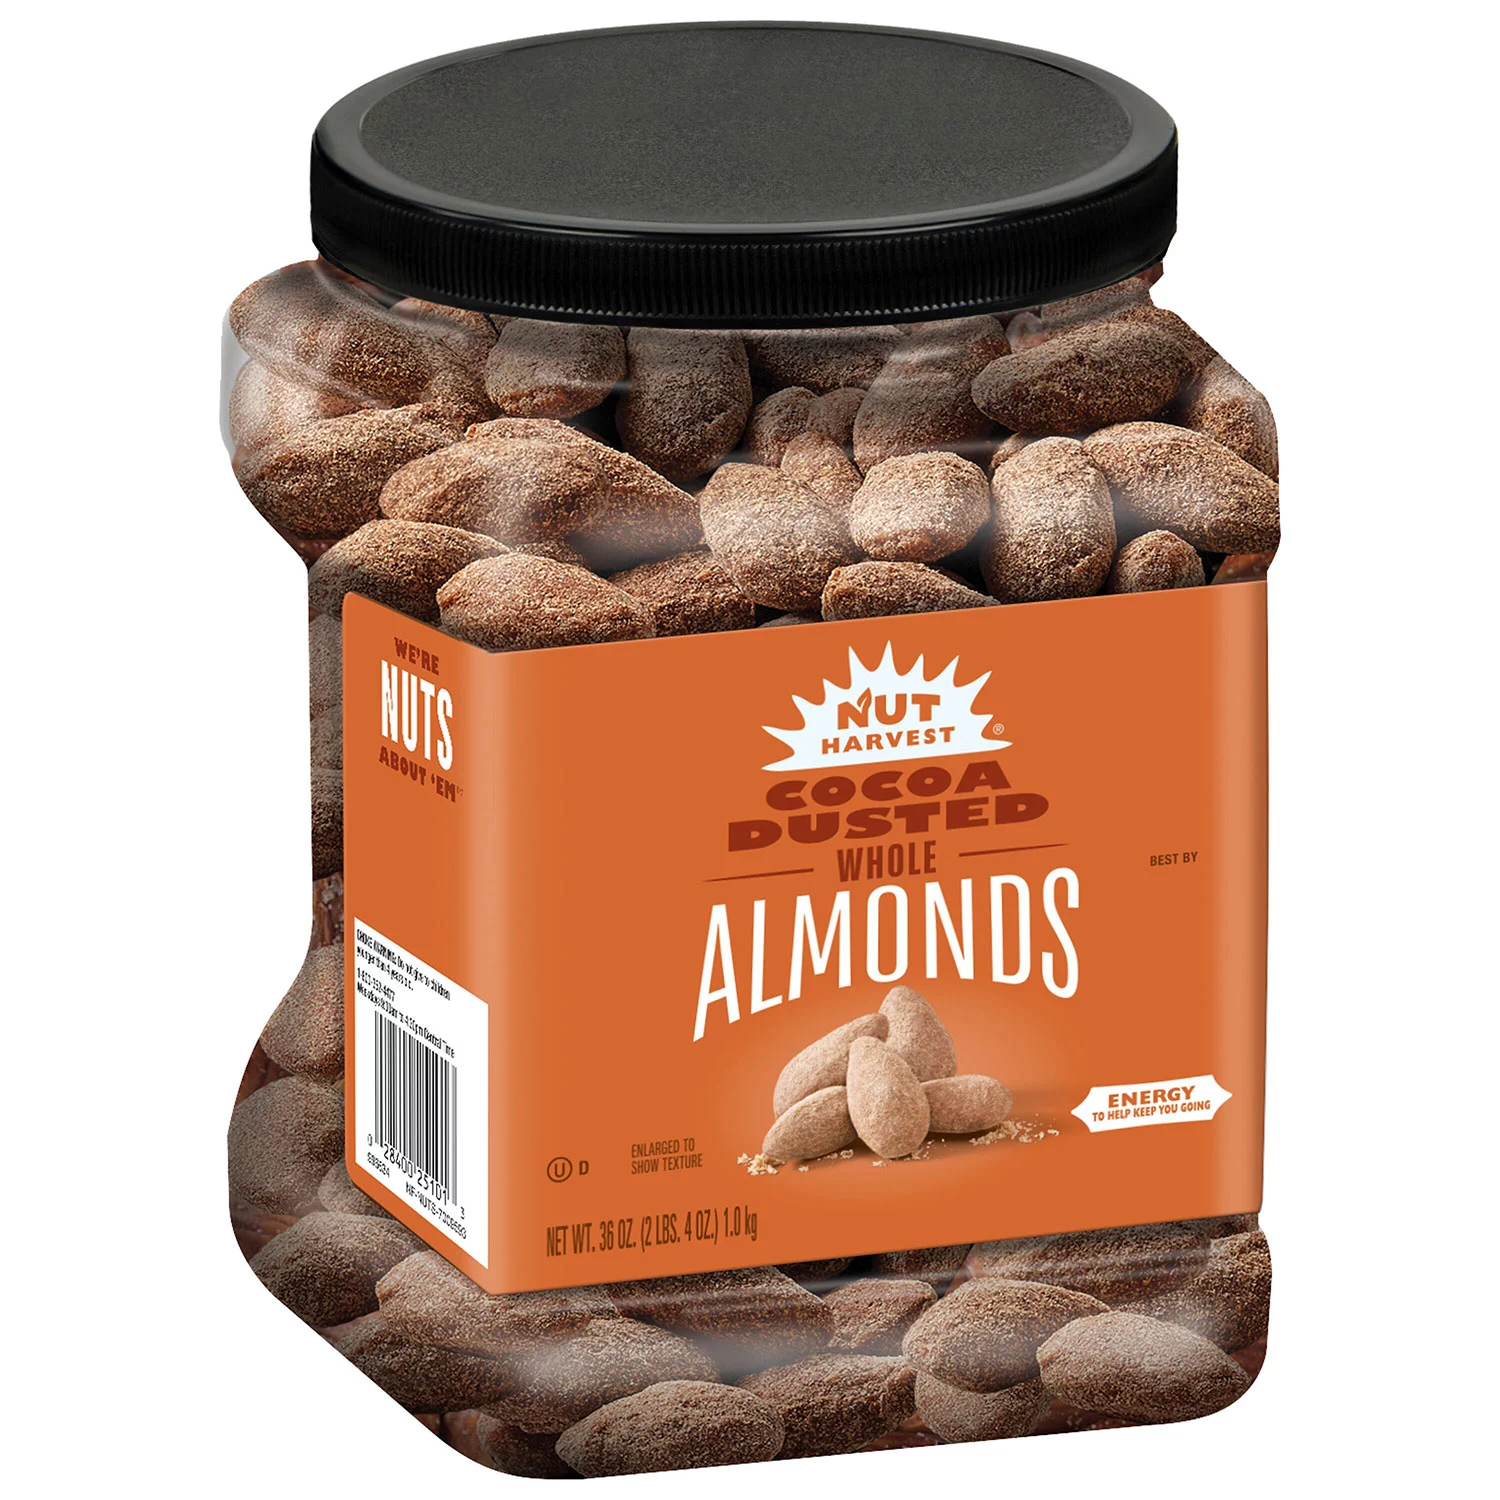 Nut Harvest Cocoa Dusted Almonds